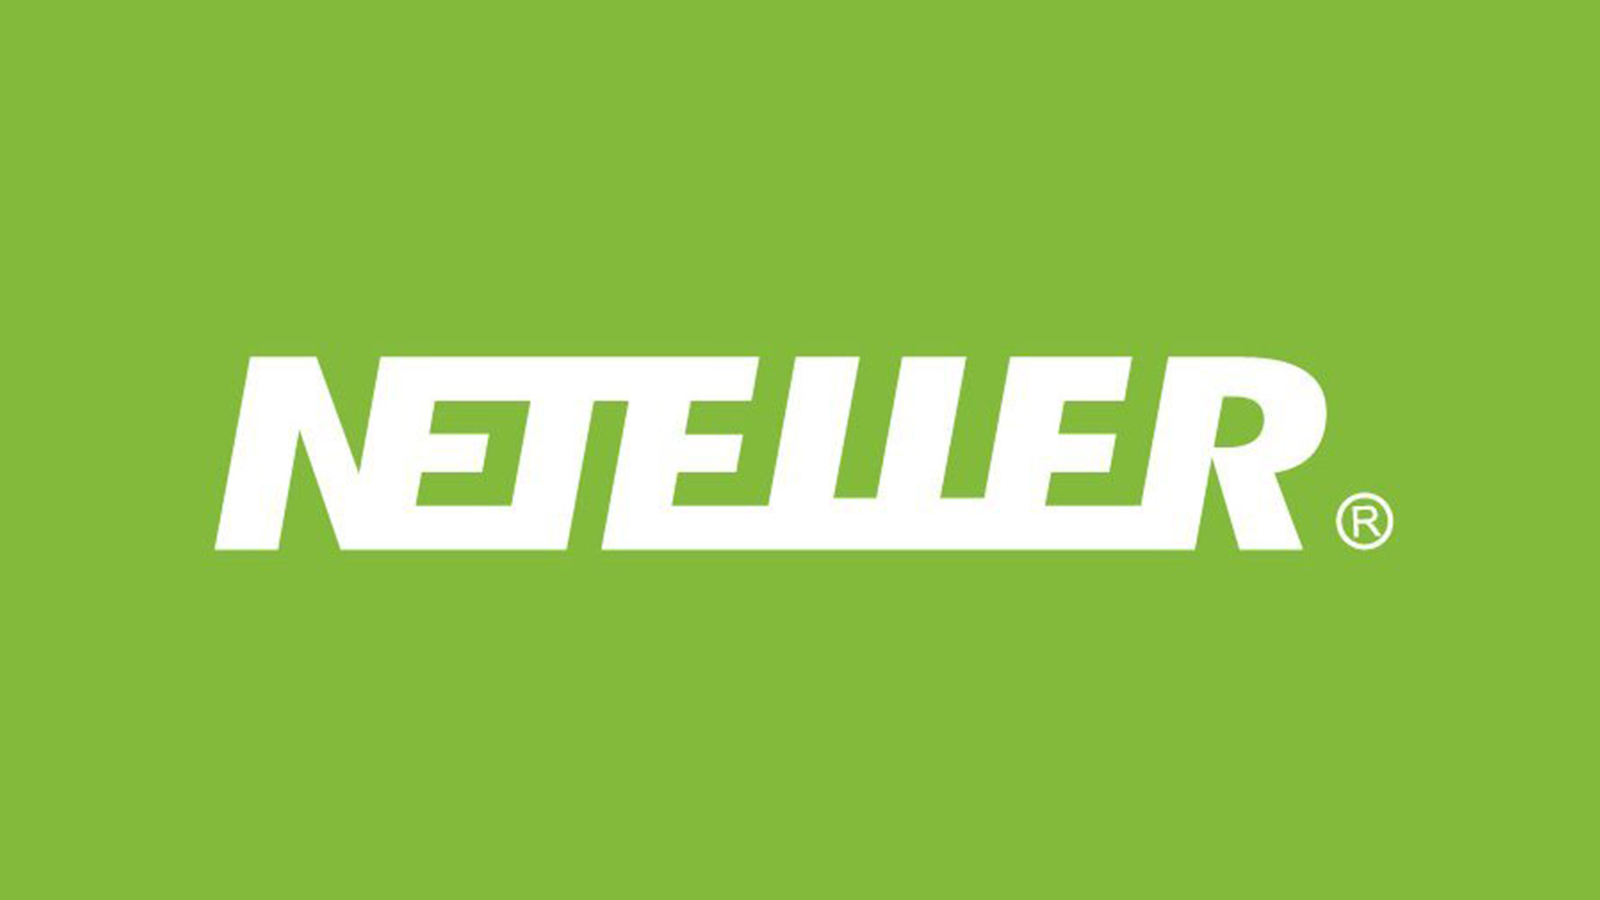 Neteller - Guide to Online Casino Payments